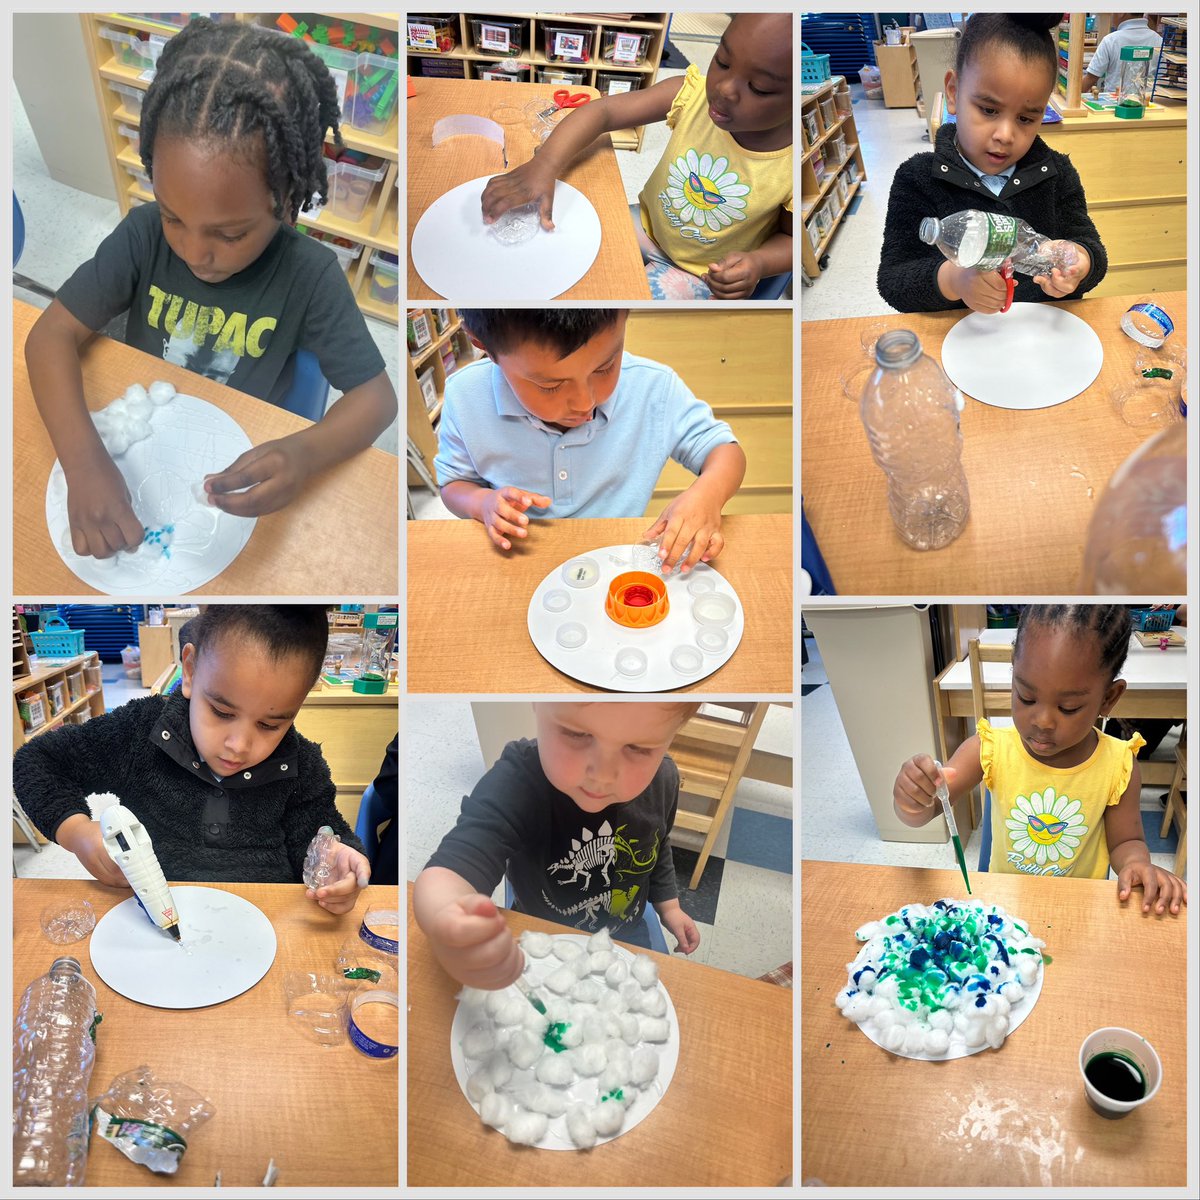 🌎 Our preschoolers are celebrating Earth Day by turning trash into treasure! ♻️🎨 Let's make art, not waste, and keep our planet clean and green! 🖼️💚 #TrashToTreasure #EarthDayCrafts #PreschoolArtists'